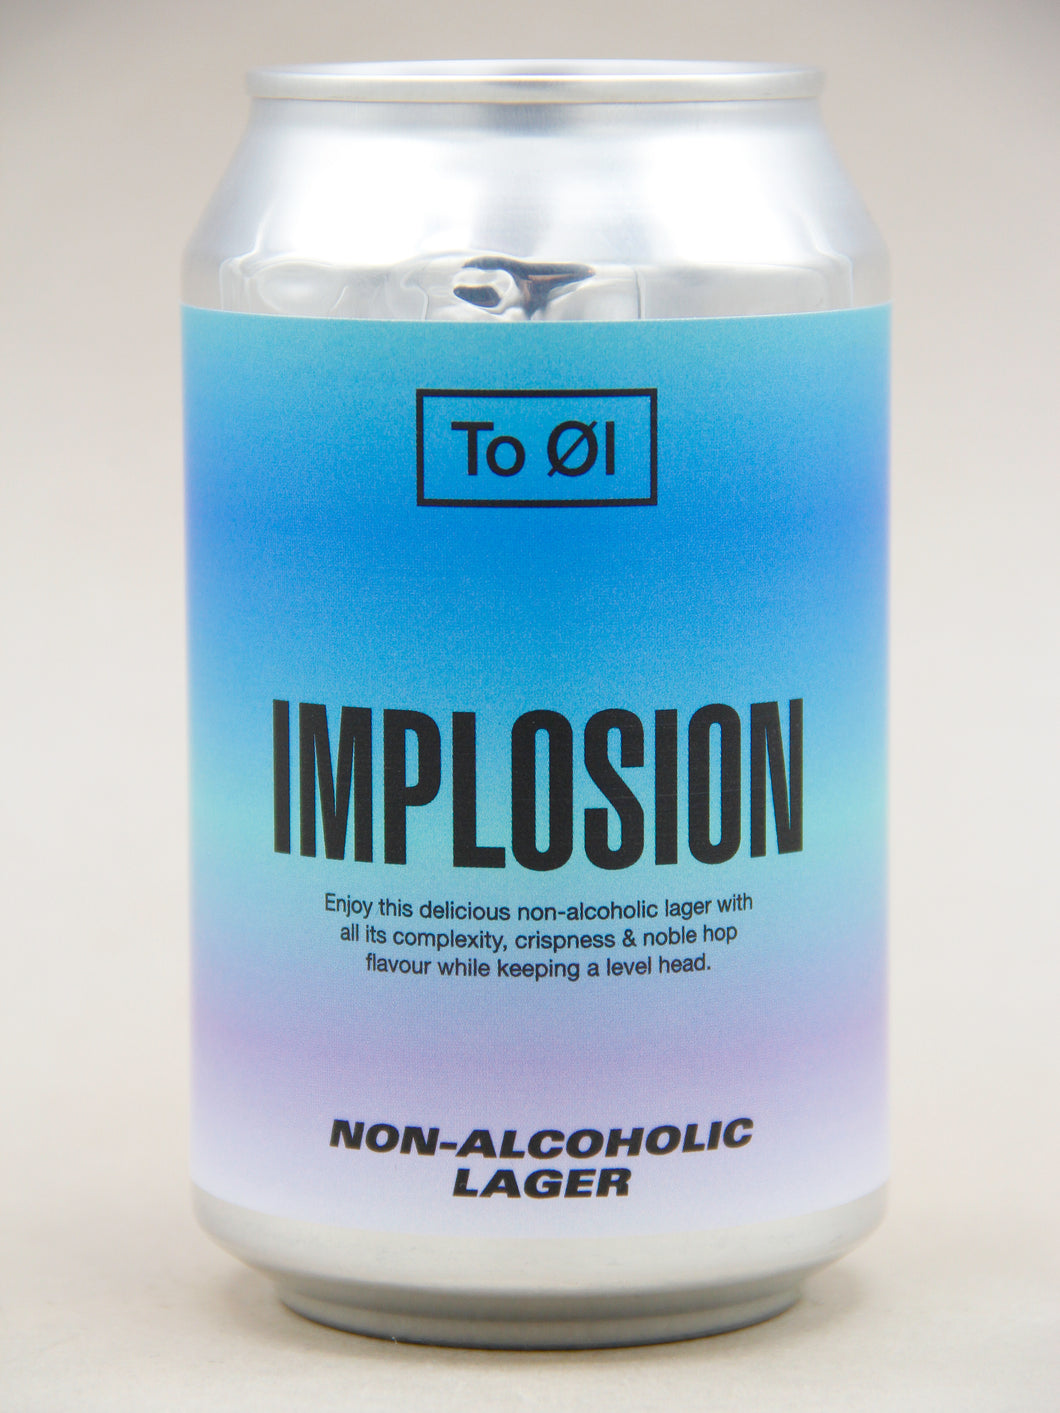 To Øl: Implosion, Lager Non-Alcoholic Beer (0.3%, 33cl CAN)